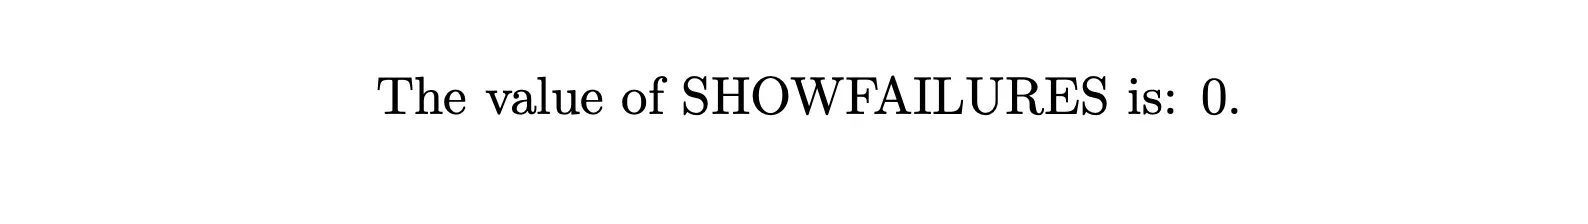 A screenshot of a simple LaTeX document where SHOWFAILURES is correctly set to 0